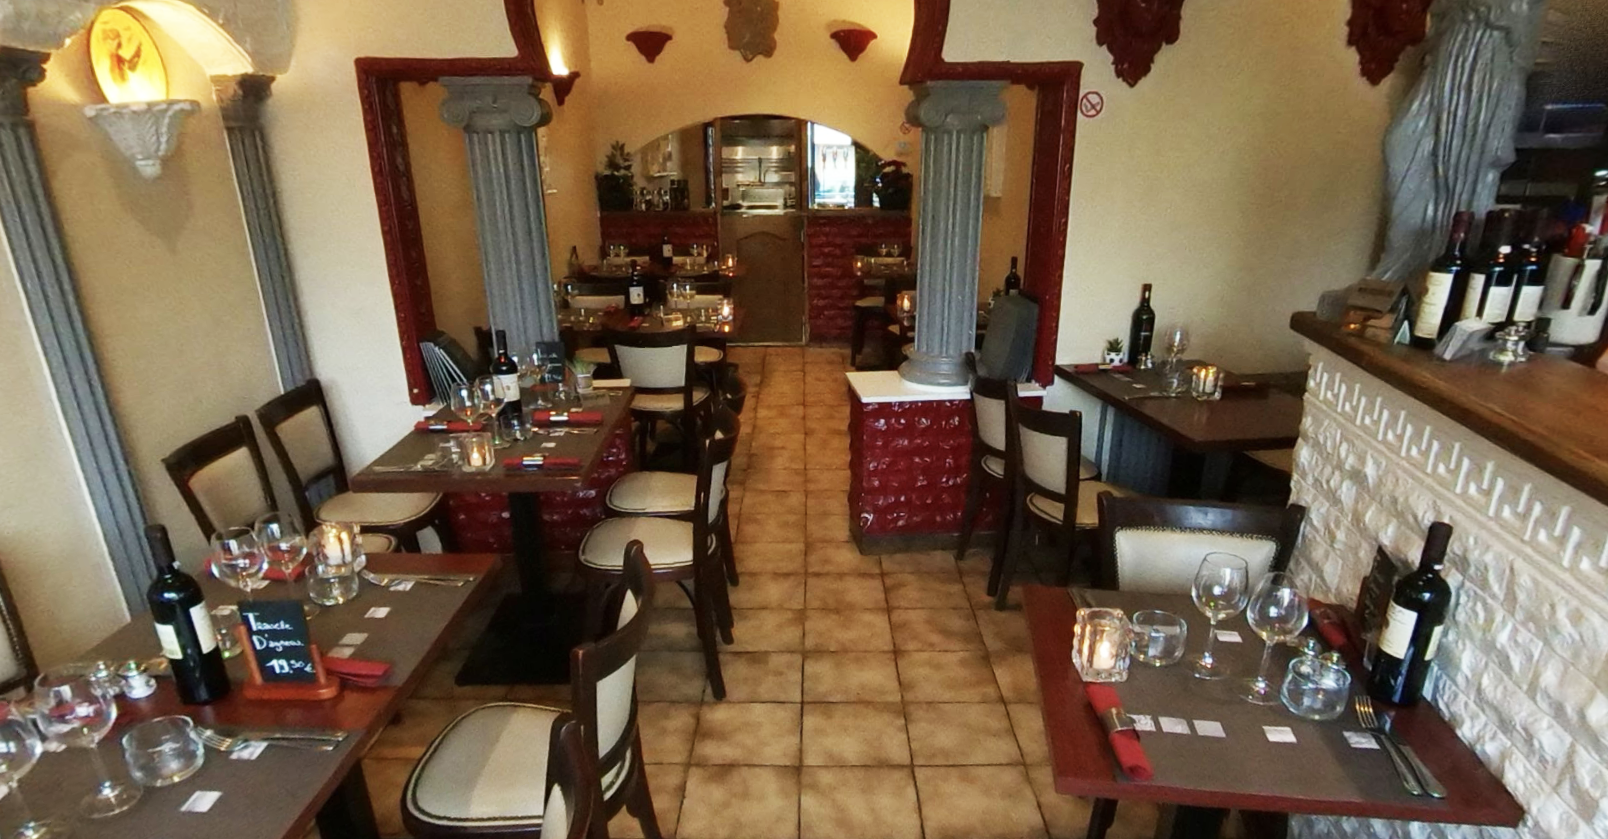 Cover image of restaurant